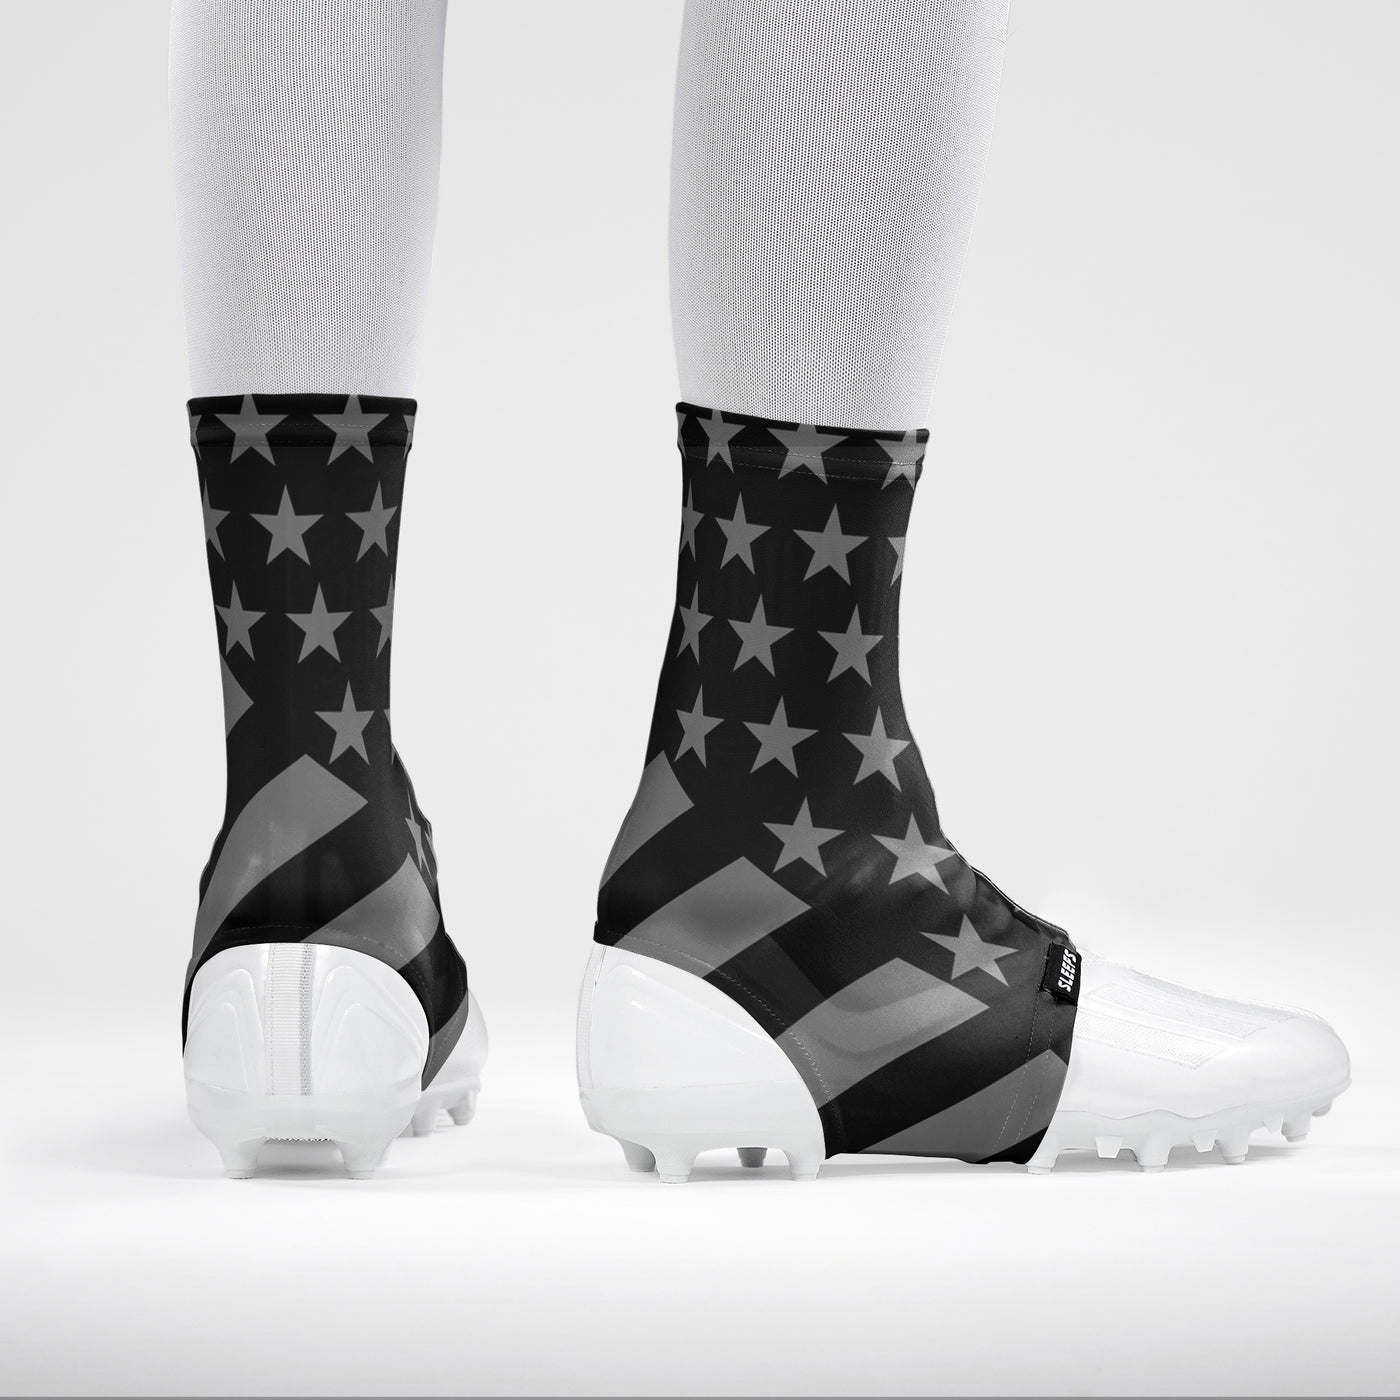 Tactical USA Flag Spats / Cleat Covers